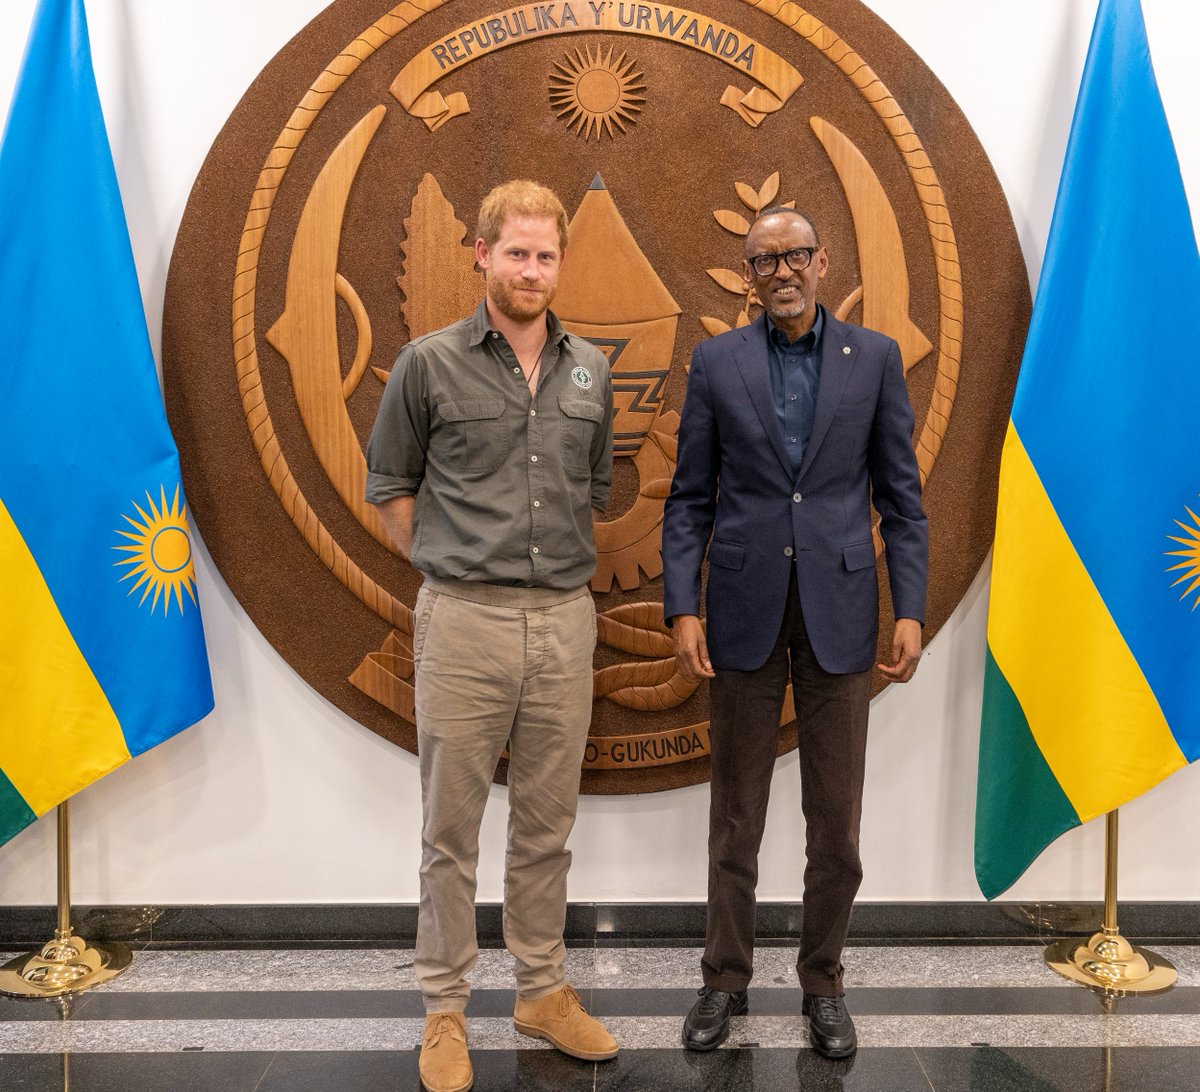 President Kagame received Prince Harry, The Duke of Sussex, who visited Rwanda as part of his work as President of African Parks. The Government of Rwanda has agreements with African Parks to manage Akagera and Nyungwe National Parks.